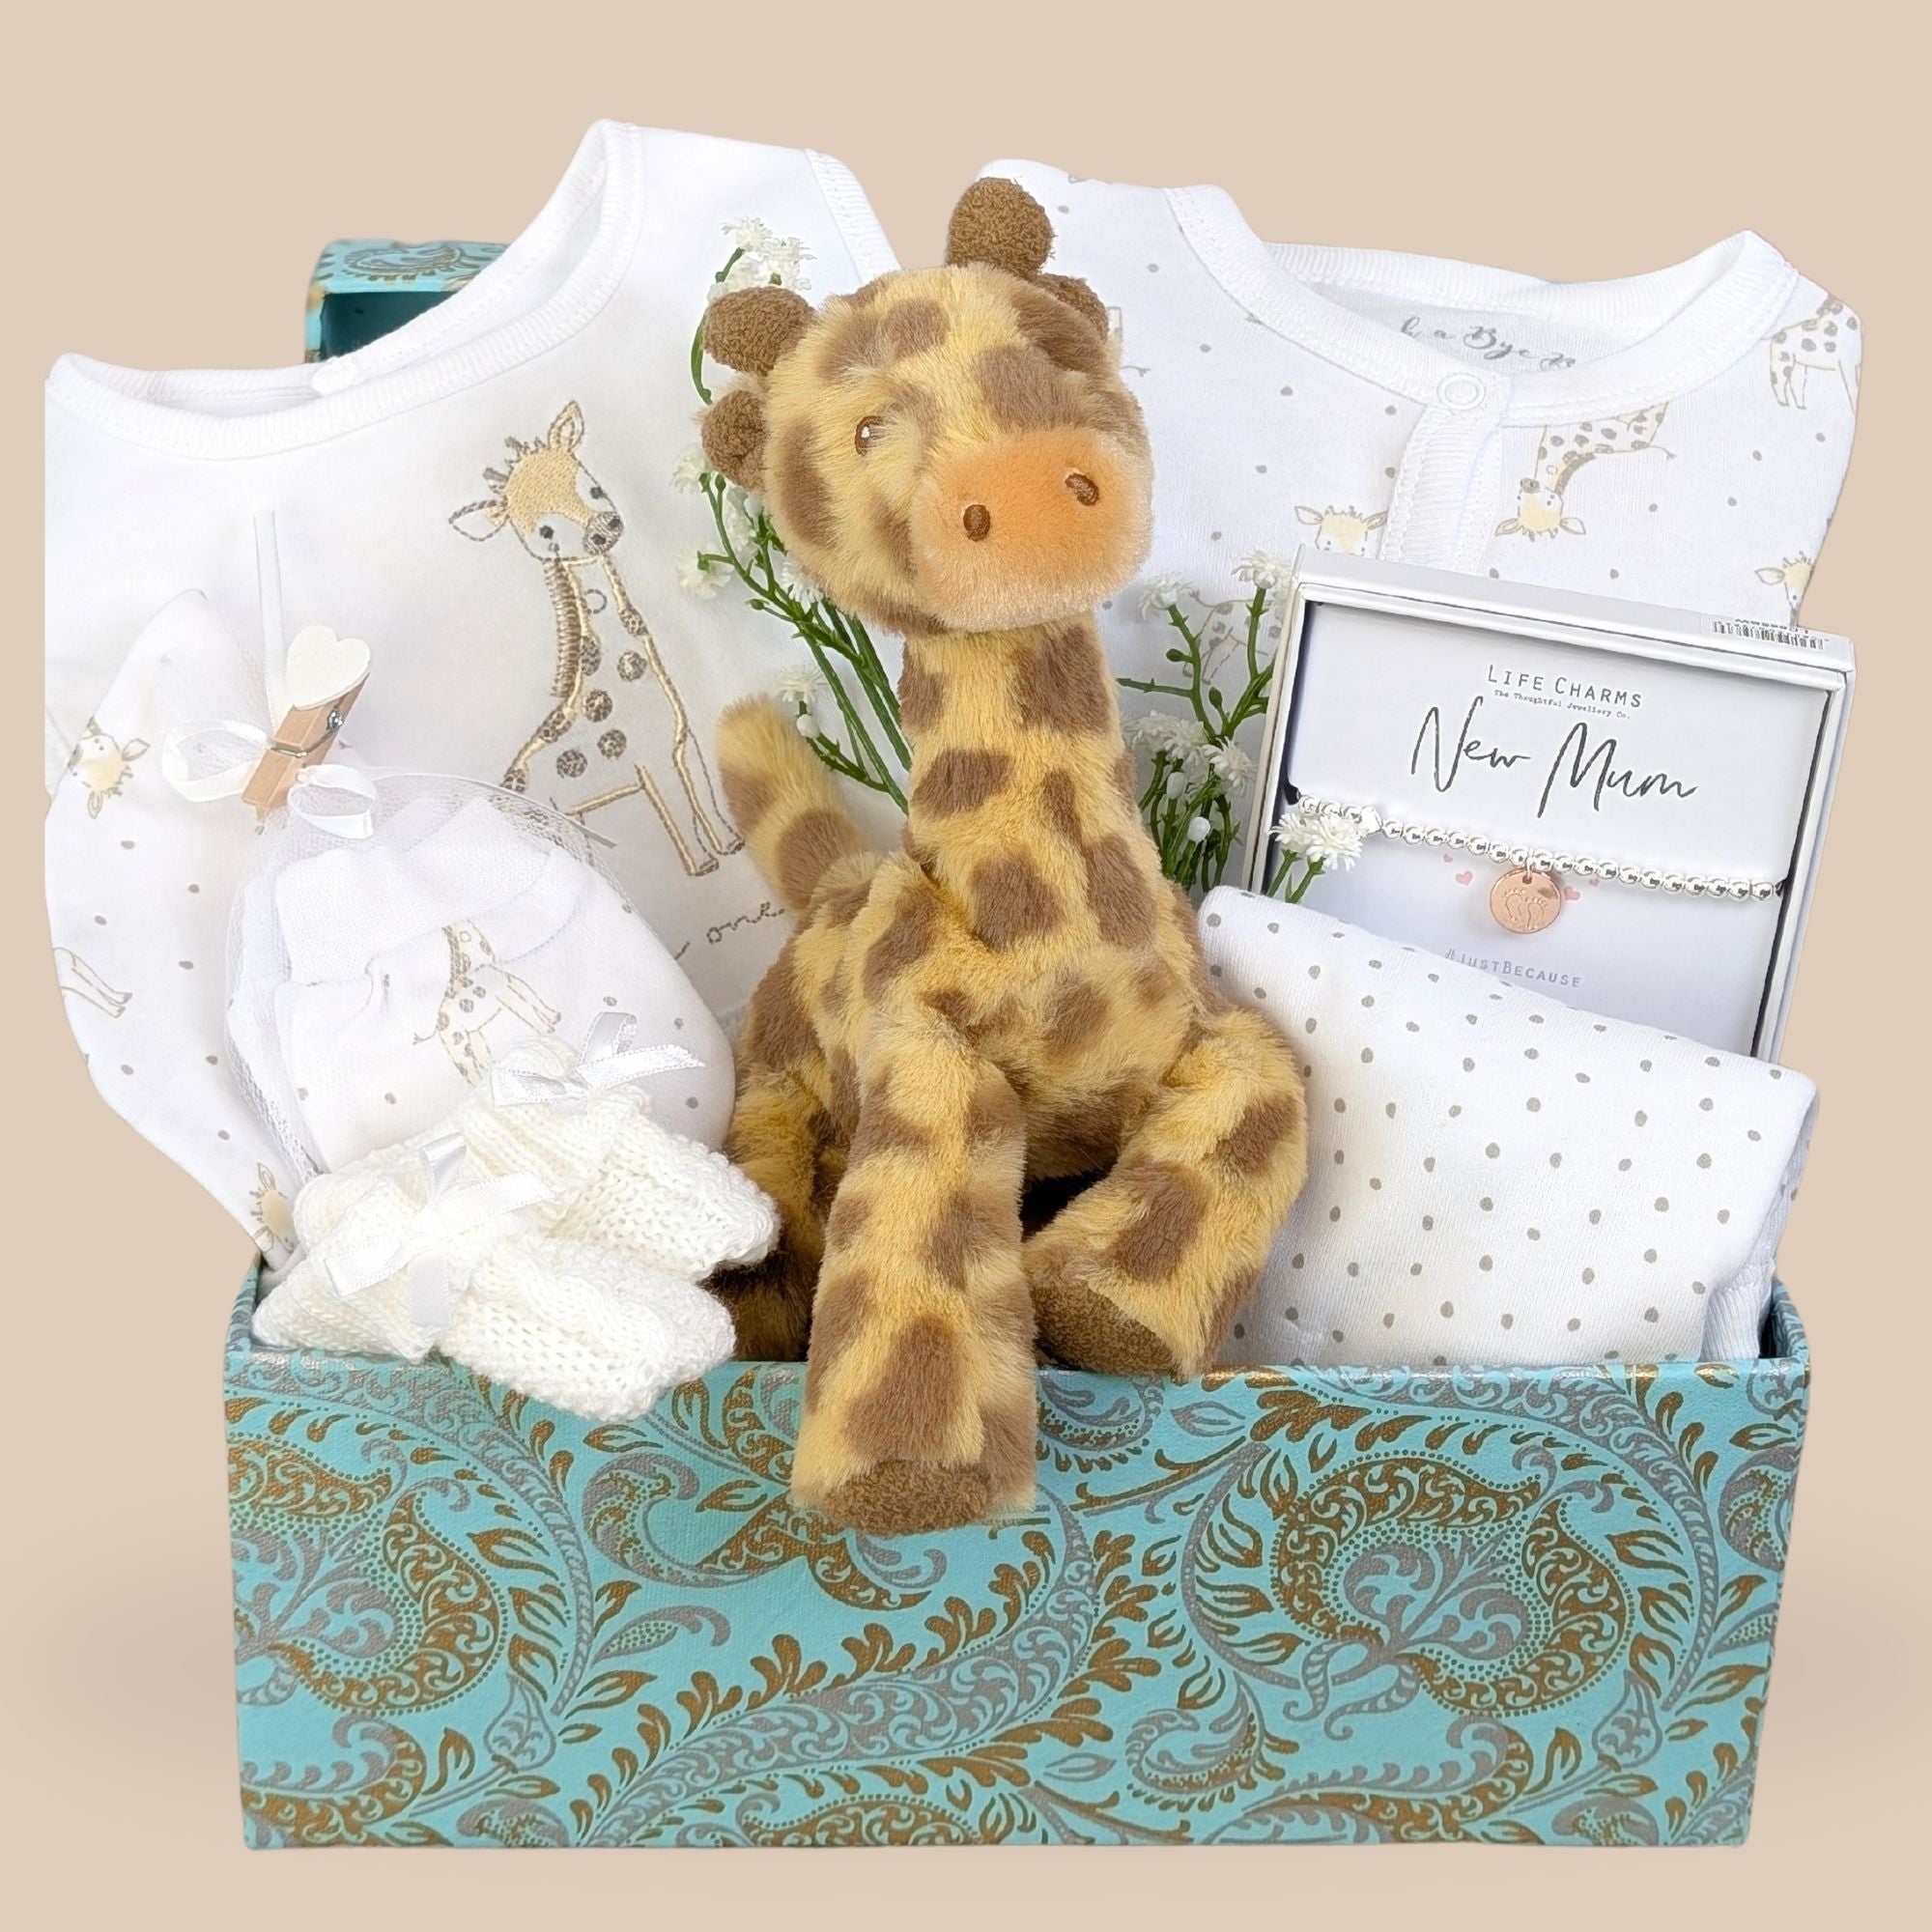 new mum gifts box with giraffe clothing set for a new baby, soft toy giraffe, bracelet for mum and baby booties.